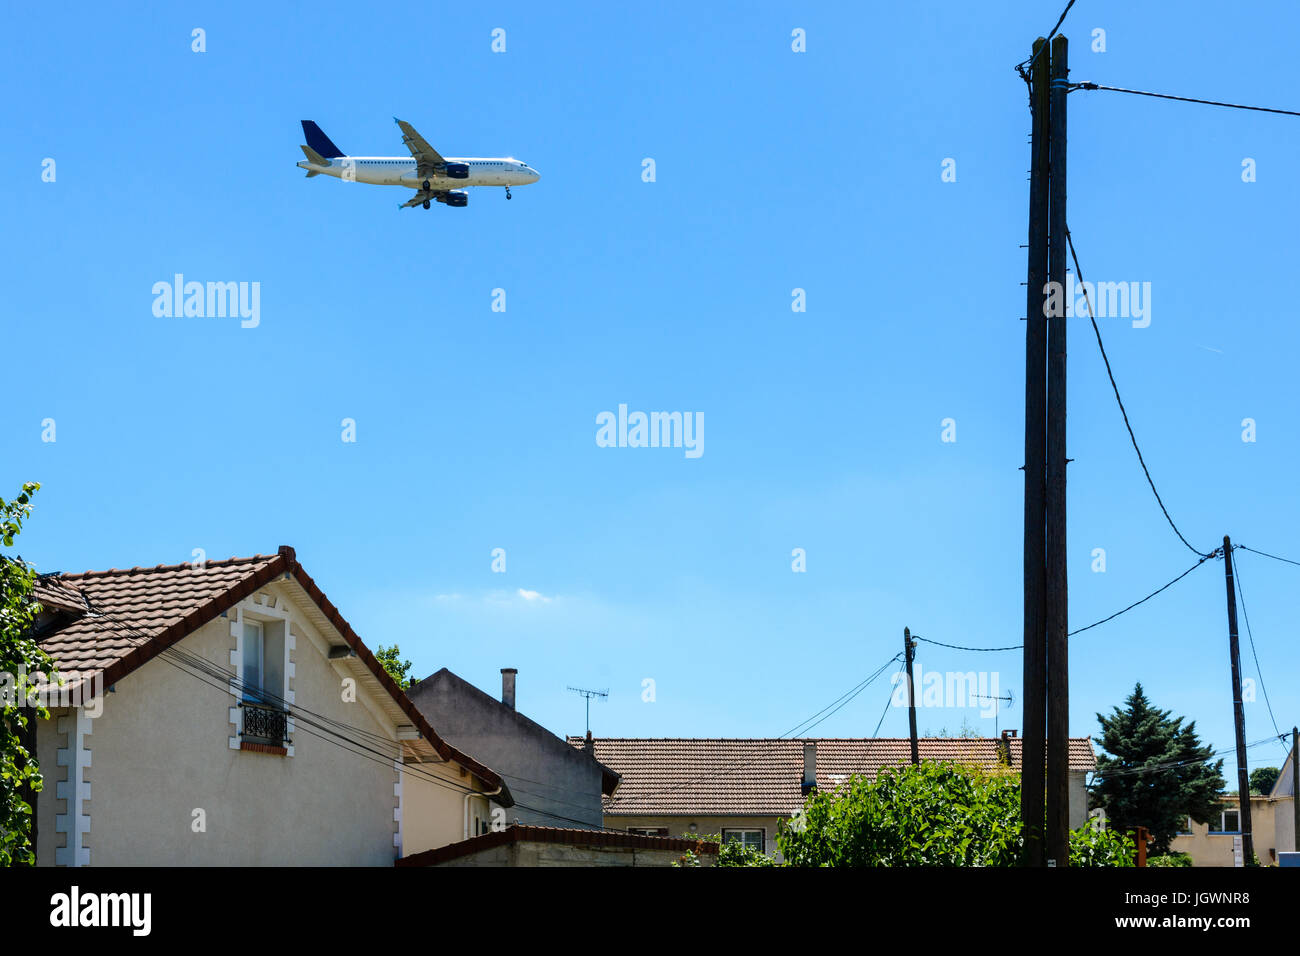 An airliner in landing approach flying above a residential area with houses in the foreground. Stock Photo